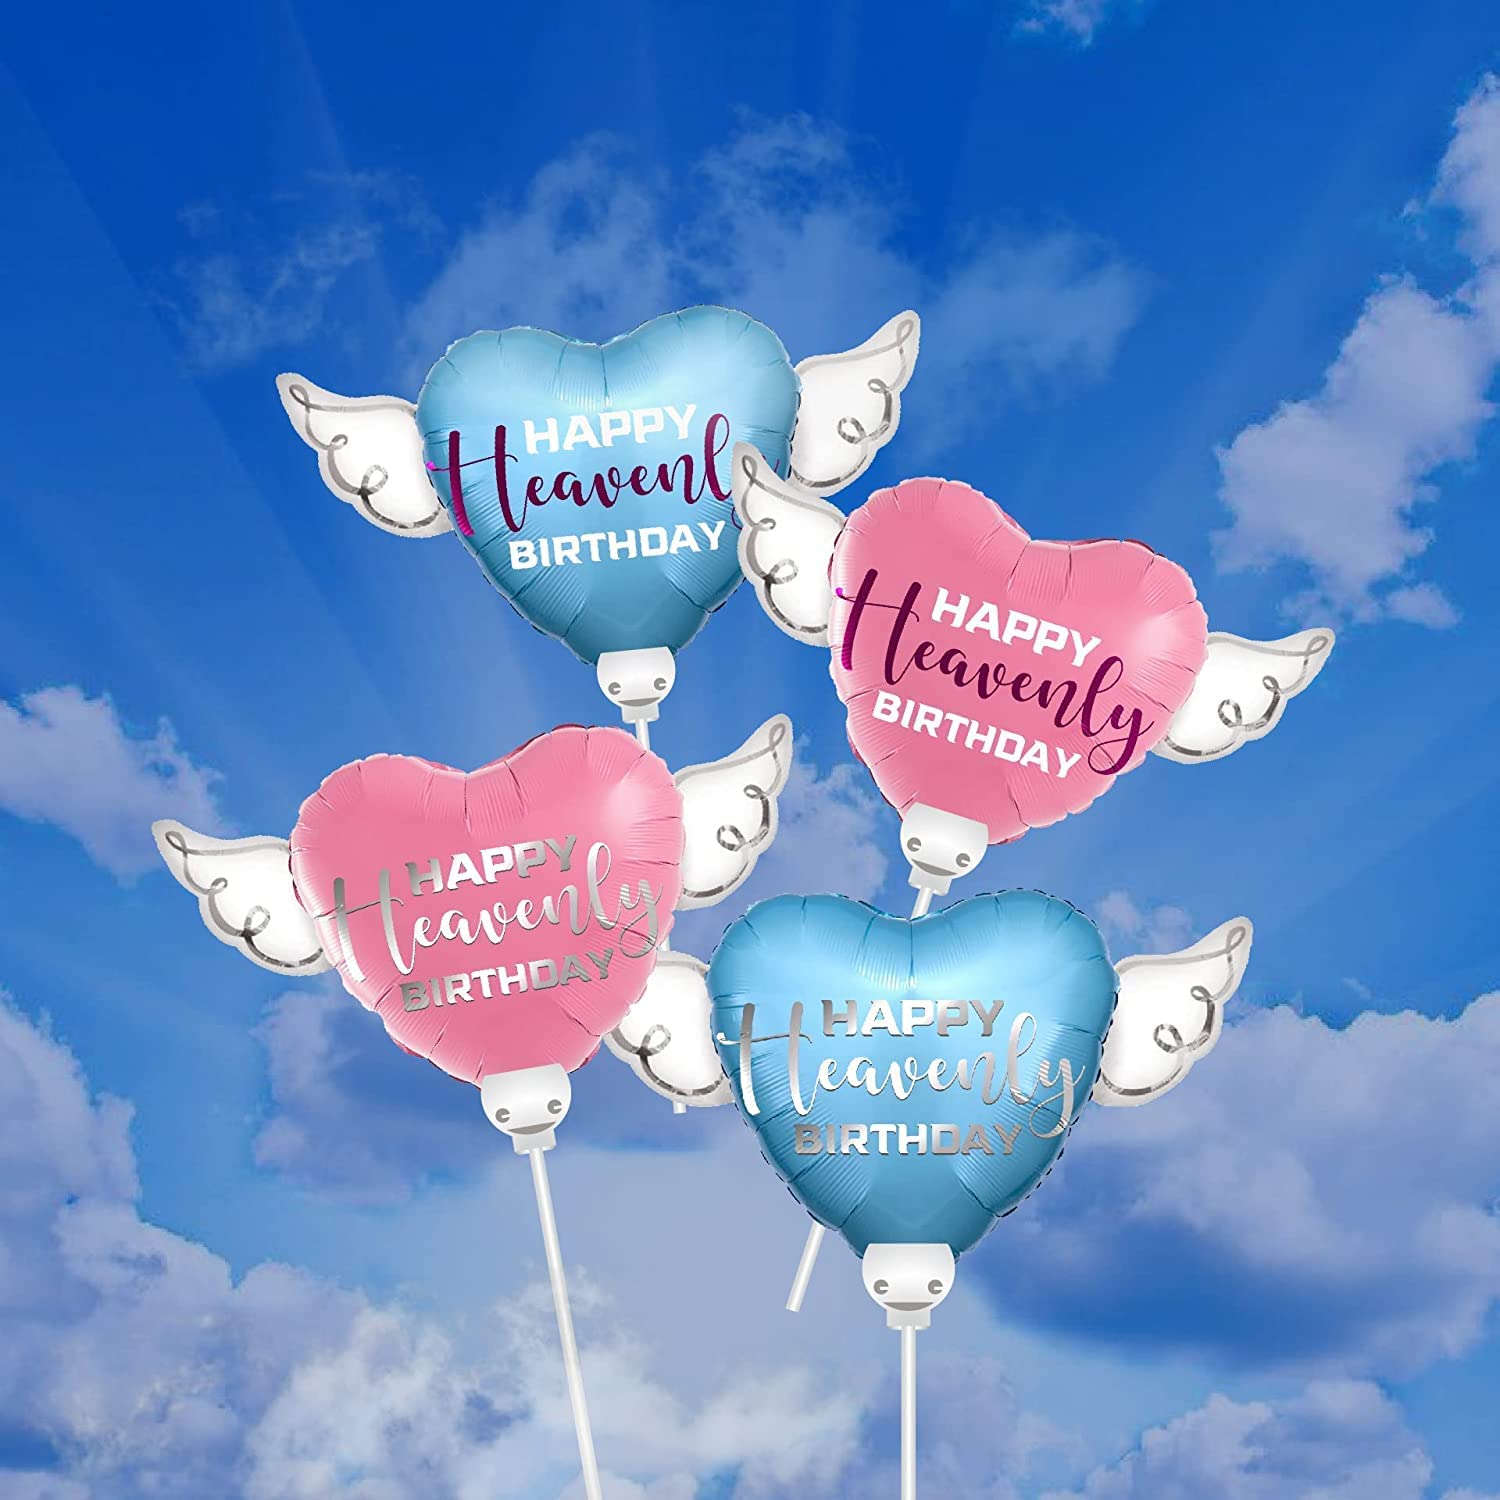  Happy Heavenly Birthday Balloons on a Stick Heart Shaped with angel wings (Blue & Pink)